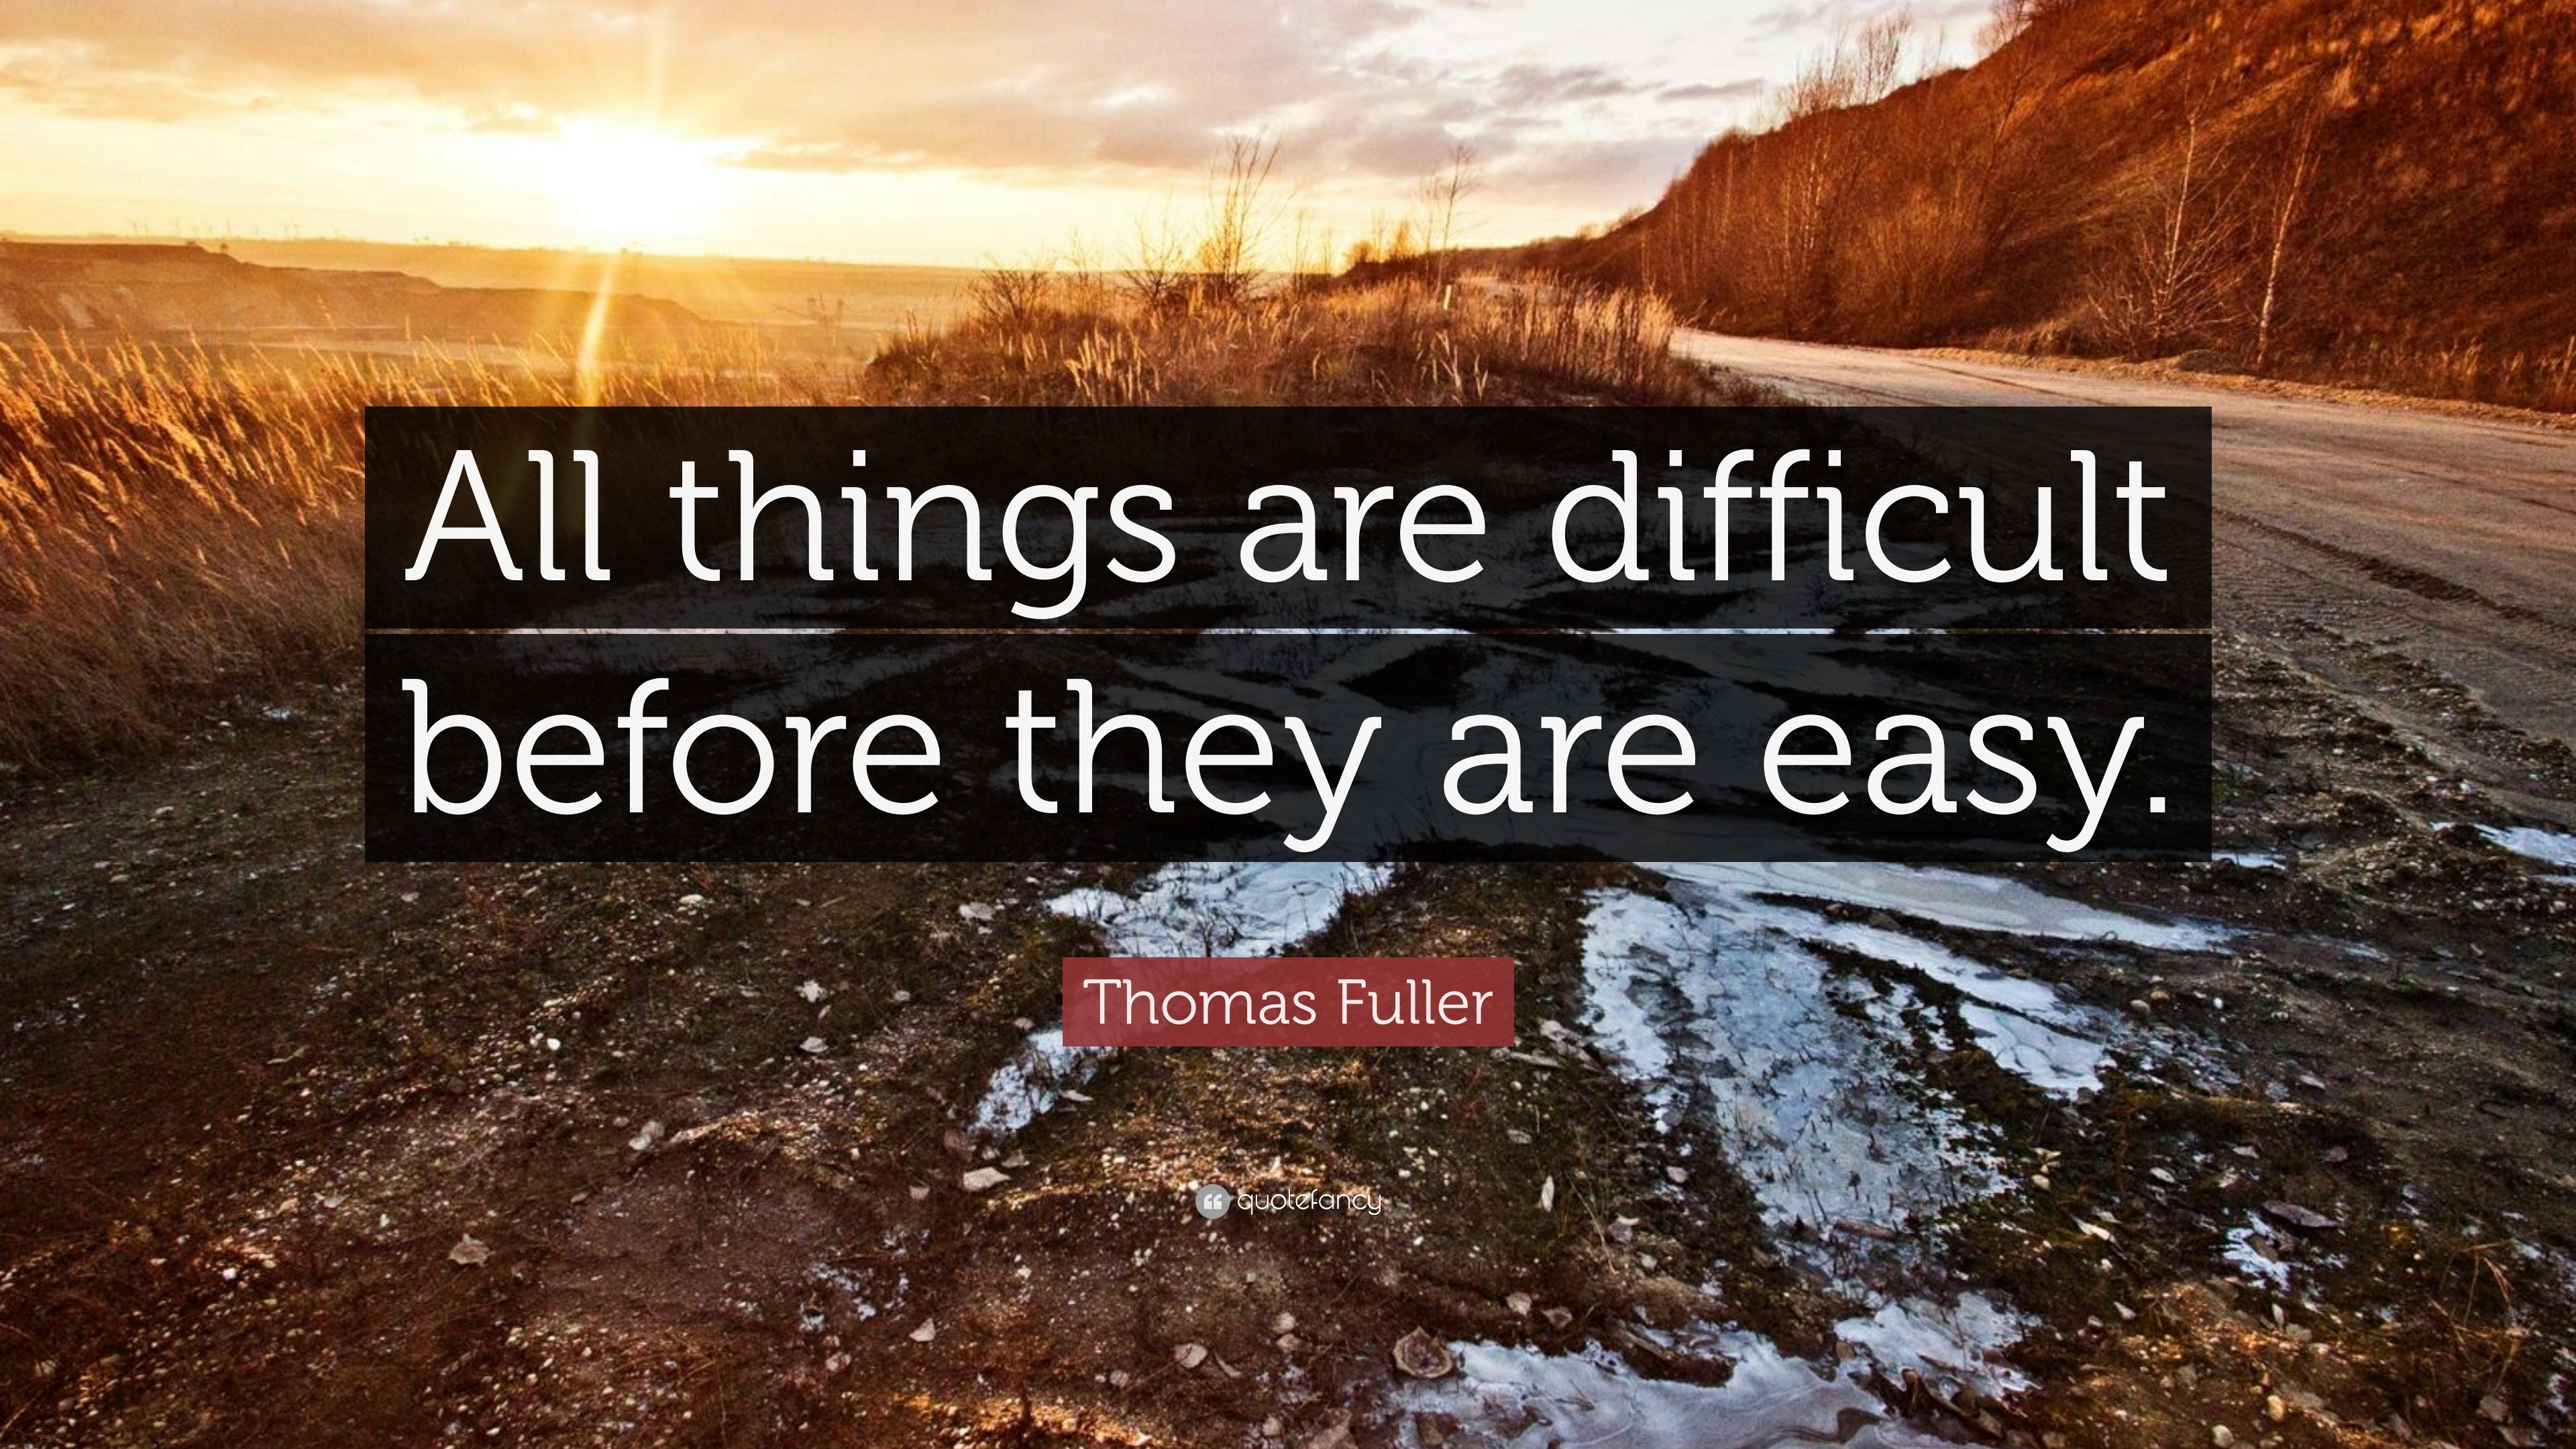 Thomas Fuller Quote: “All things are difficult before they are easy.”